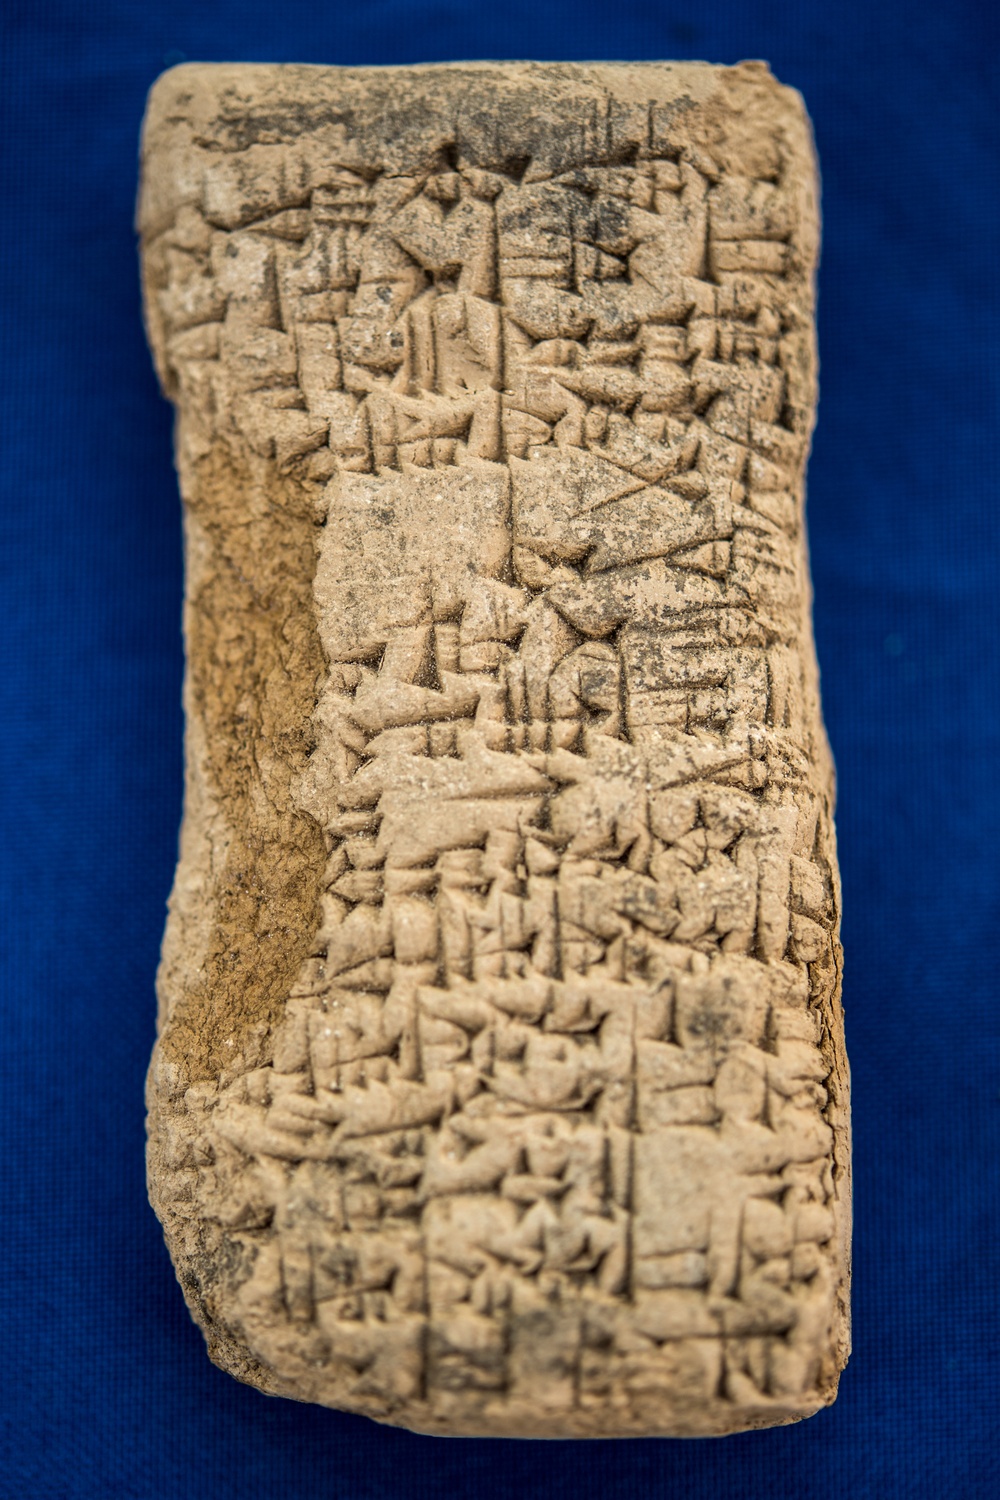 ICE returns ancient artifacts seized from Hobby Lobby to Iraq